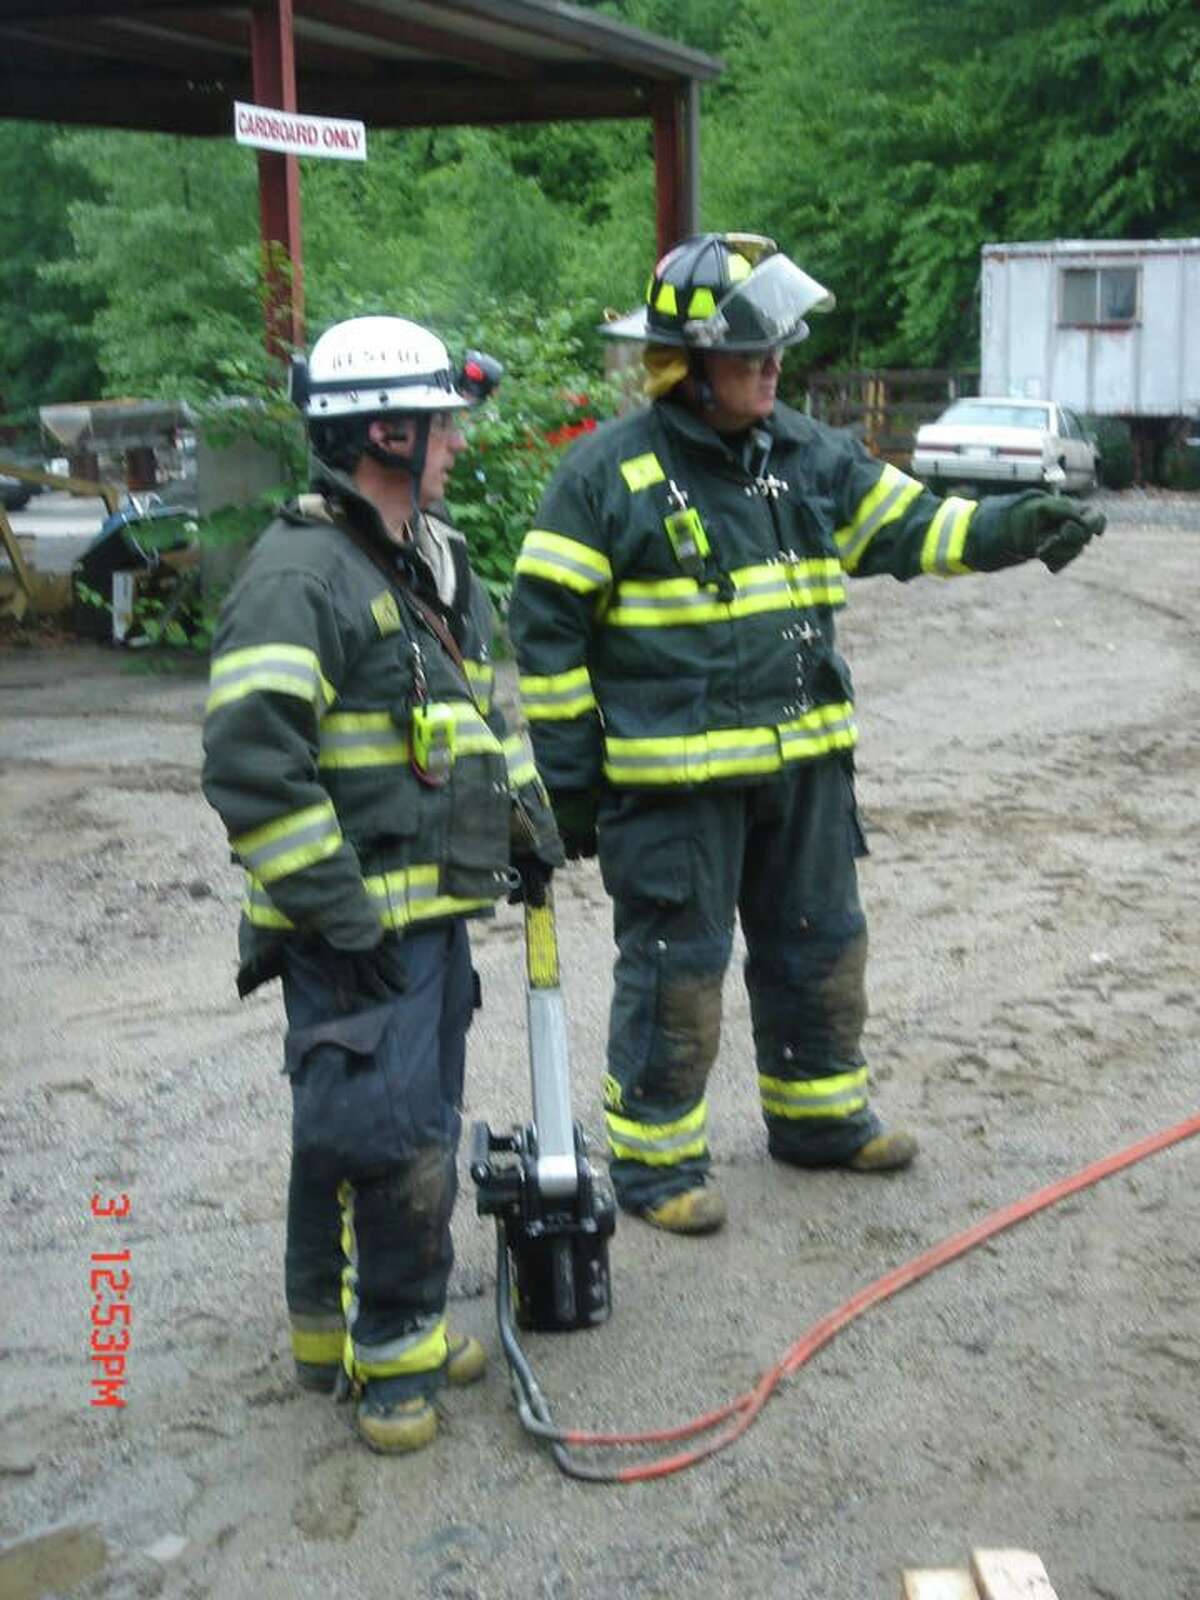 A photo of Leonard “Lenny” Blace Antinozzi with a fellow firefighter during his time with the Derby Fire Department.